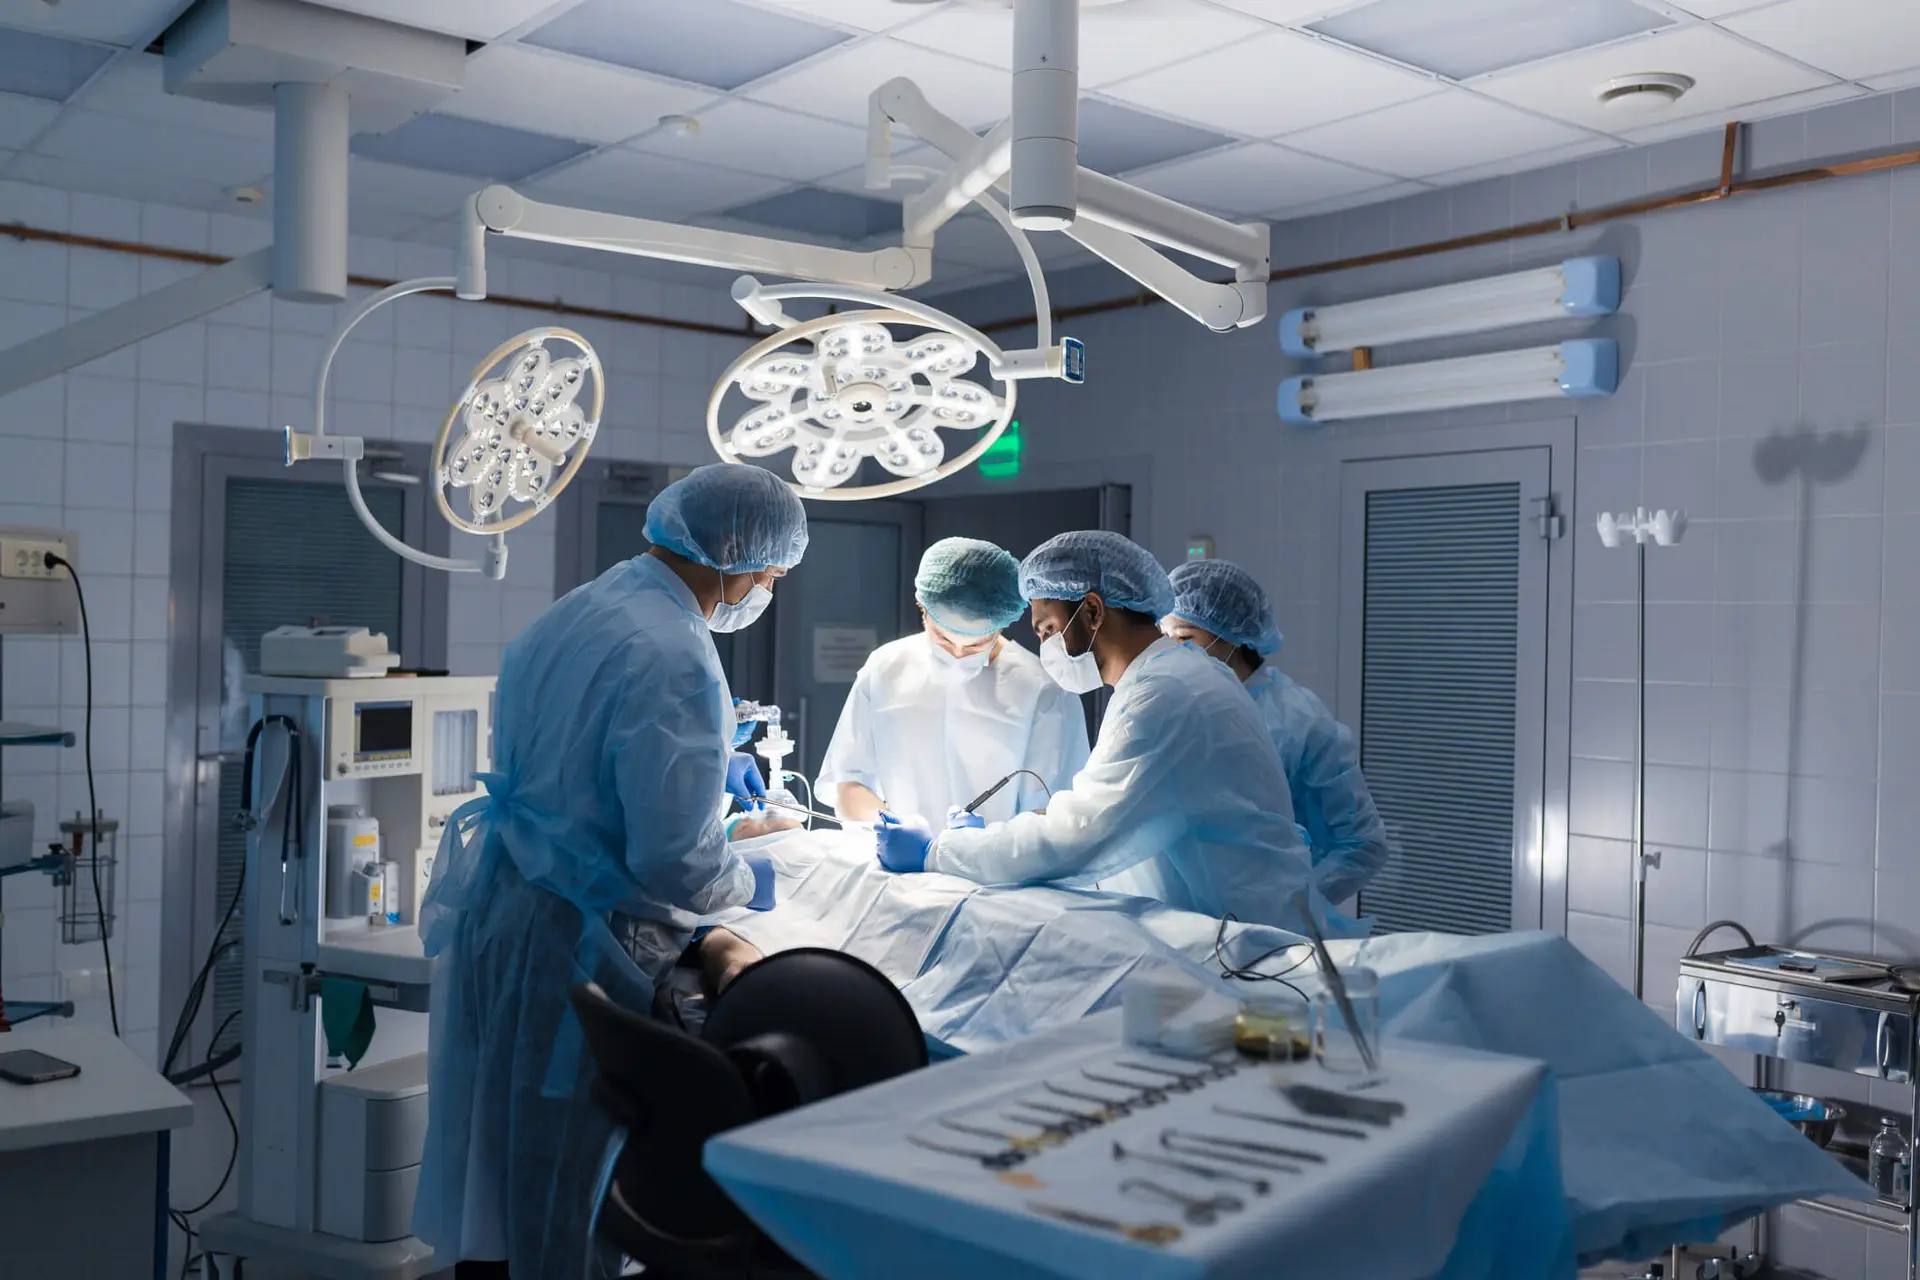 Team of Surgeons concentrating on a patient during a surgery at a hospital.